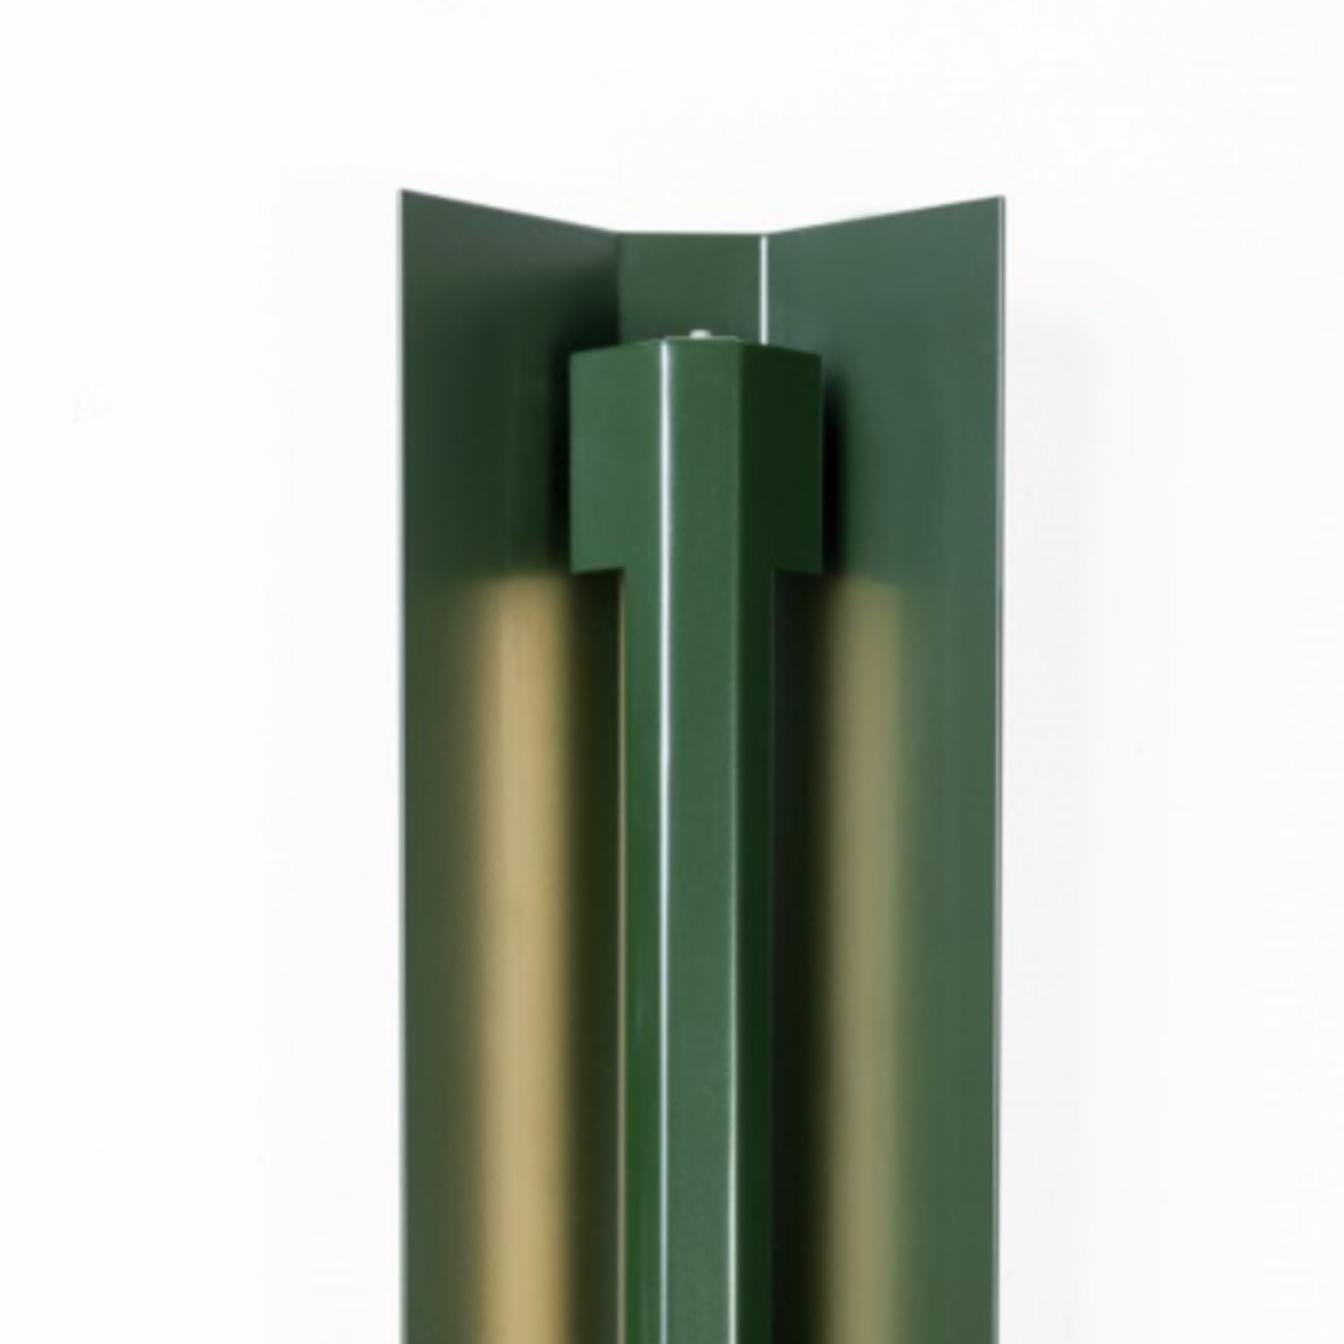 Extra large Misalliance Ral bottle green wall light by Lexavala
Dimensions: D 16 x W 160 x H 8 cm
Materials: powder coated aluminium.

There are two lenghts of socket covers, extending over the LED. Two short are to be found in Suspended and